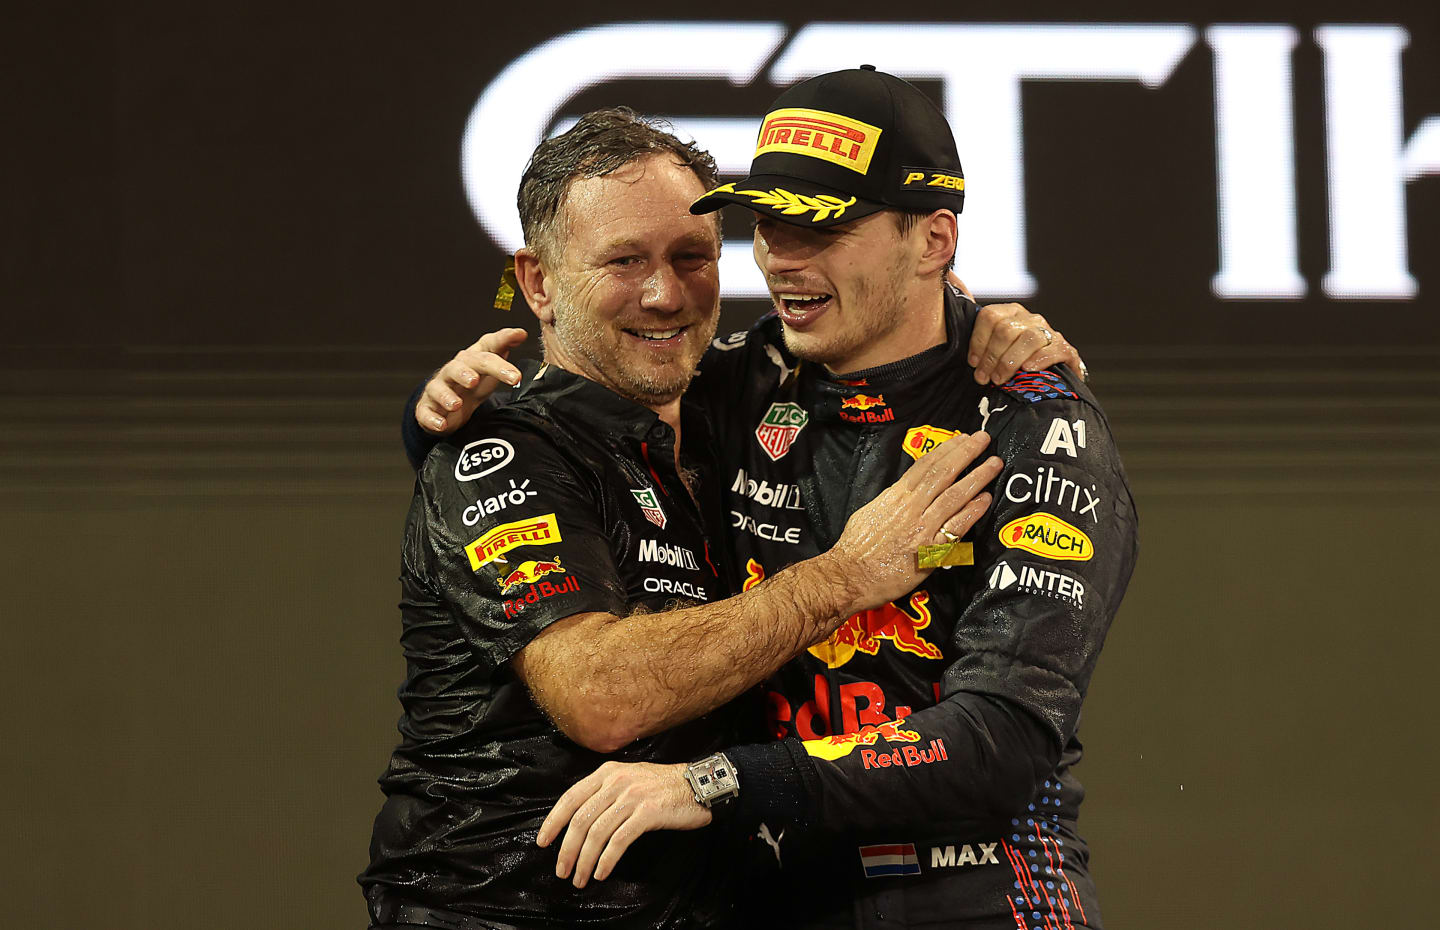 ABU DHABI, UNITED ARAB EMIRATES - DECEMBER 12: Race winner and 2021 F1 World Drivers Champion Max Verstappen of Netherlands and Red Bull Racing celebrates with Red Bull Racing Team Principal Christian Horner on the podium during the F1 Grand Prix of Abu Dhabi at Yas Marina Circuit on December 12, 2021 in Abu Dhabi, United Arab Emirates. (Photo by Lars Baron/Getty Images)